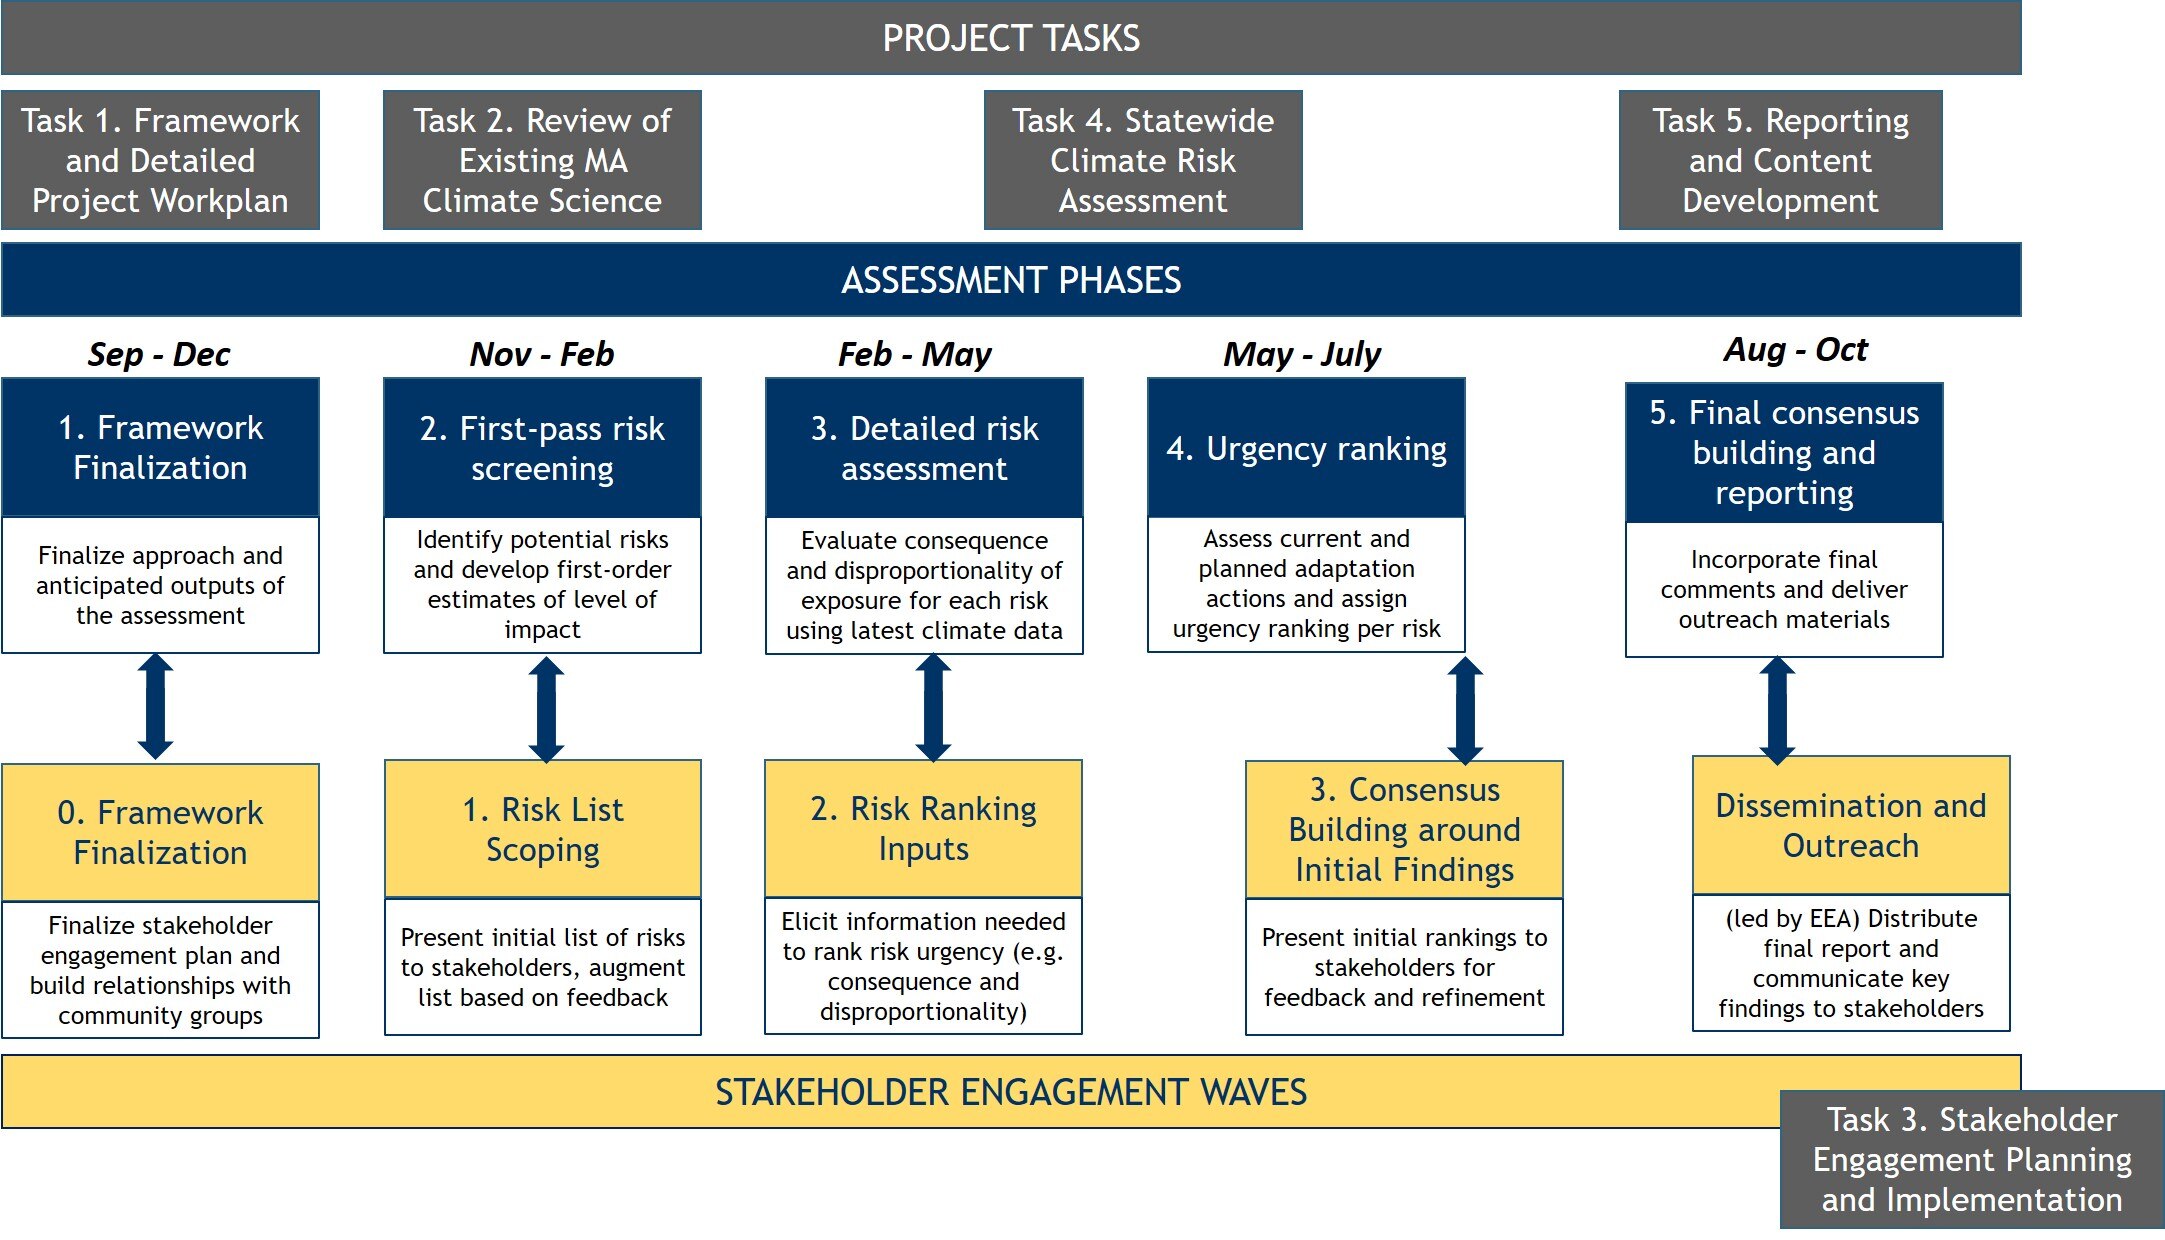 Infographic showing the progression of tasks and project phases, including the risk assessment and stakeholder engagement.